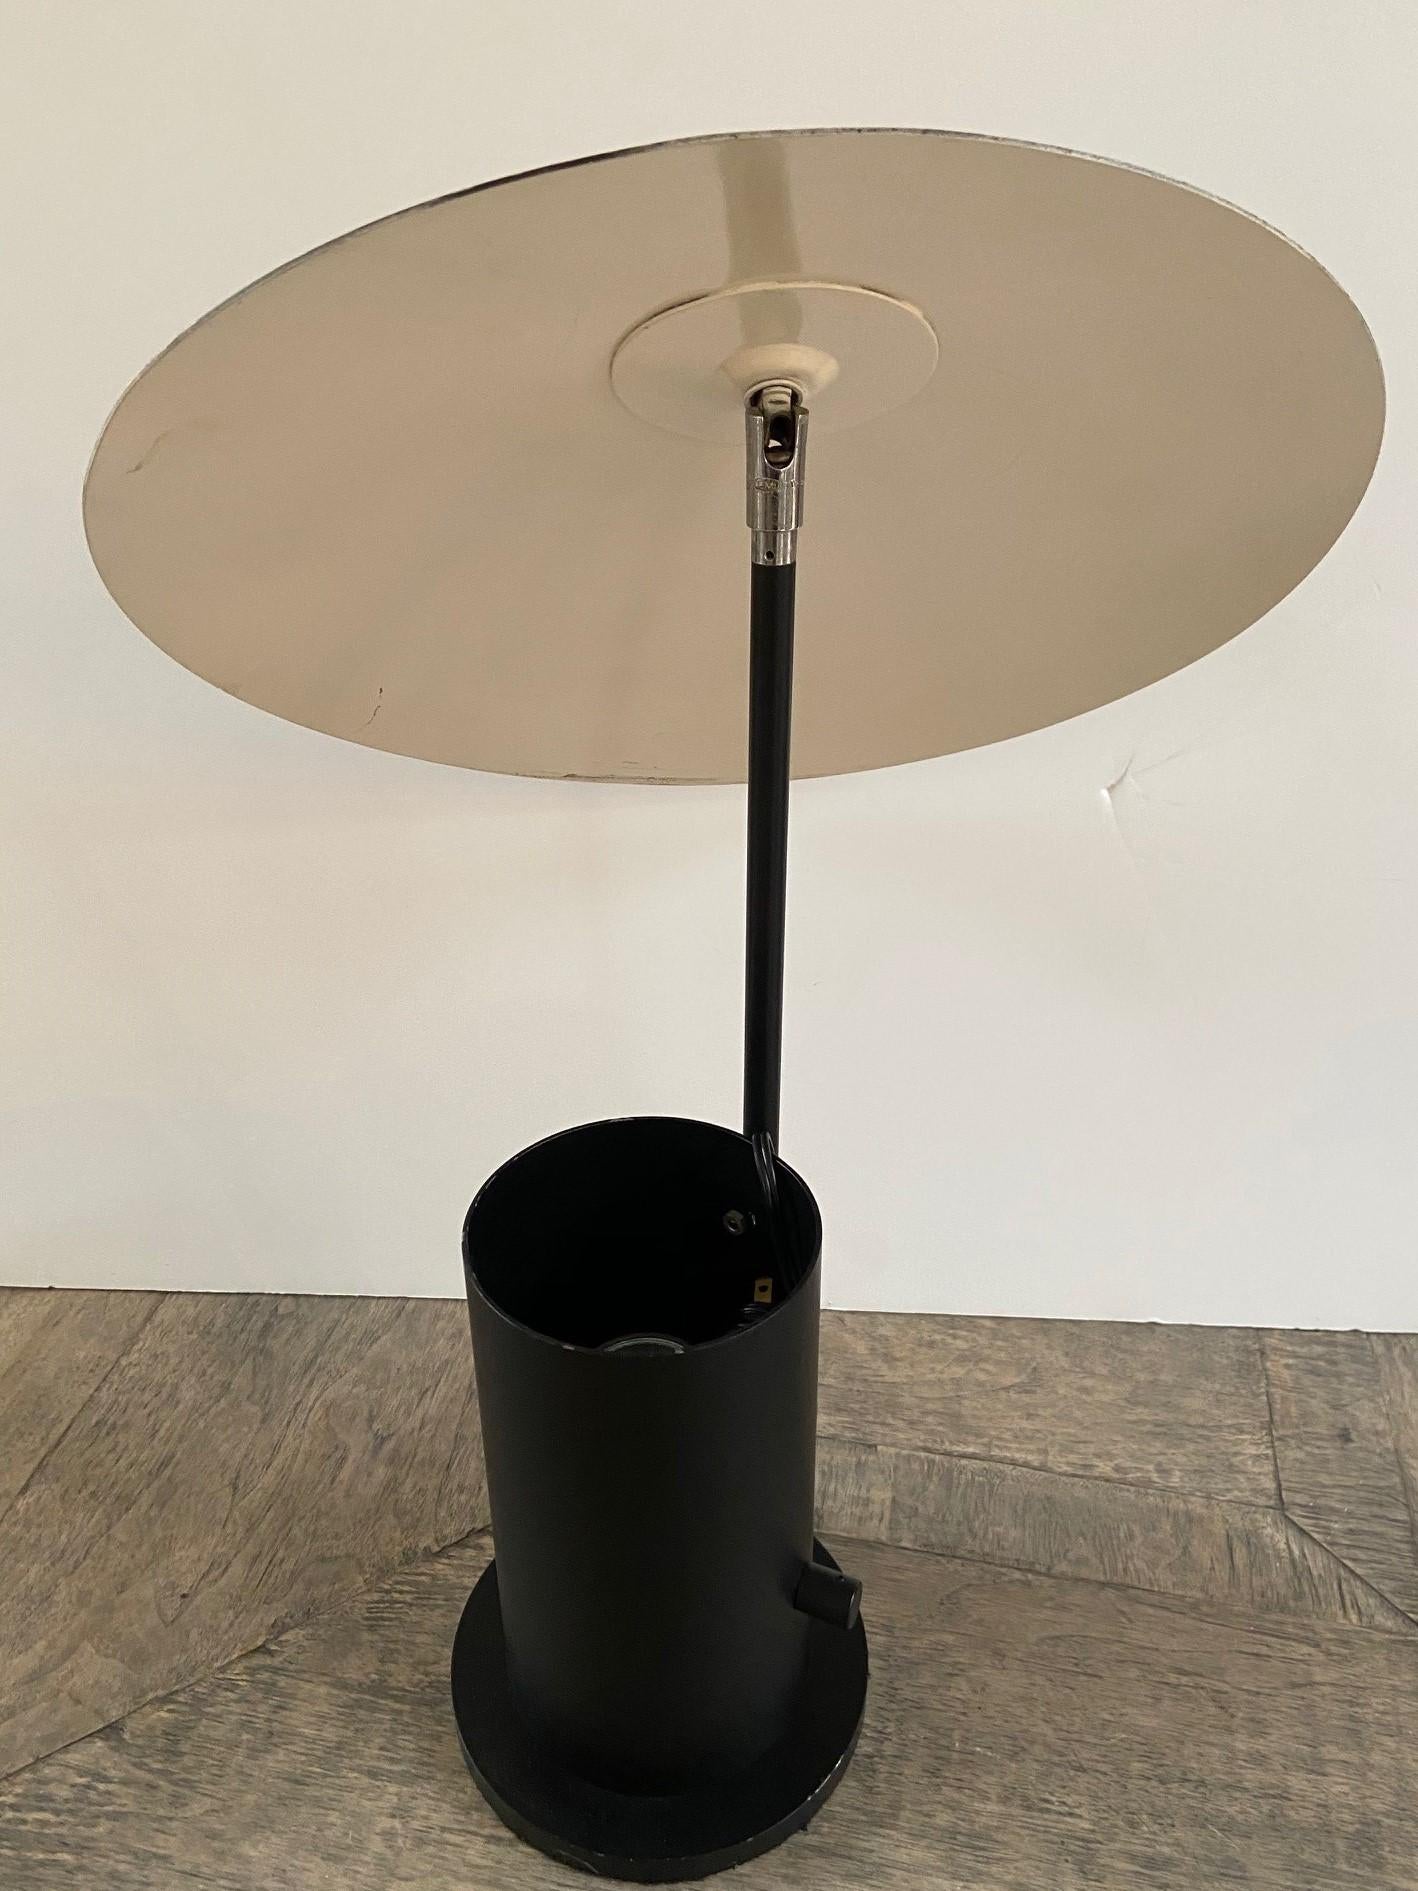 20th century enamel metal geometric modern table lamp, adjustable shade, light bulb sits in a cylindrical base design.